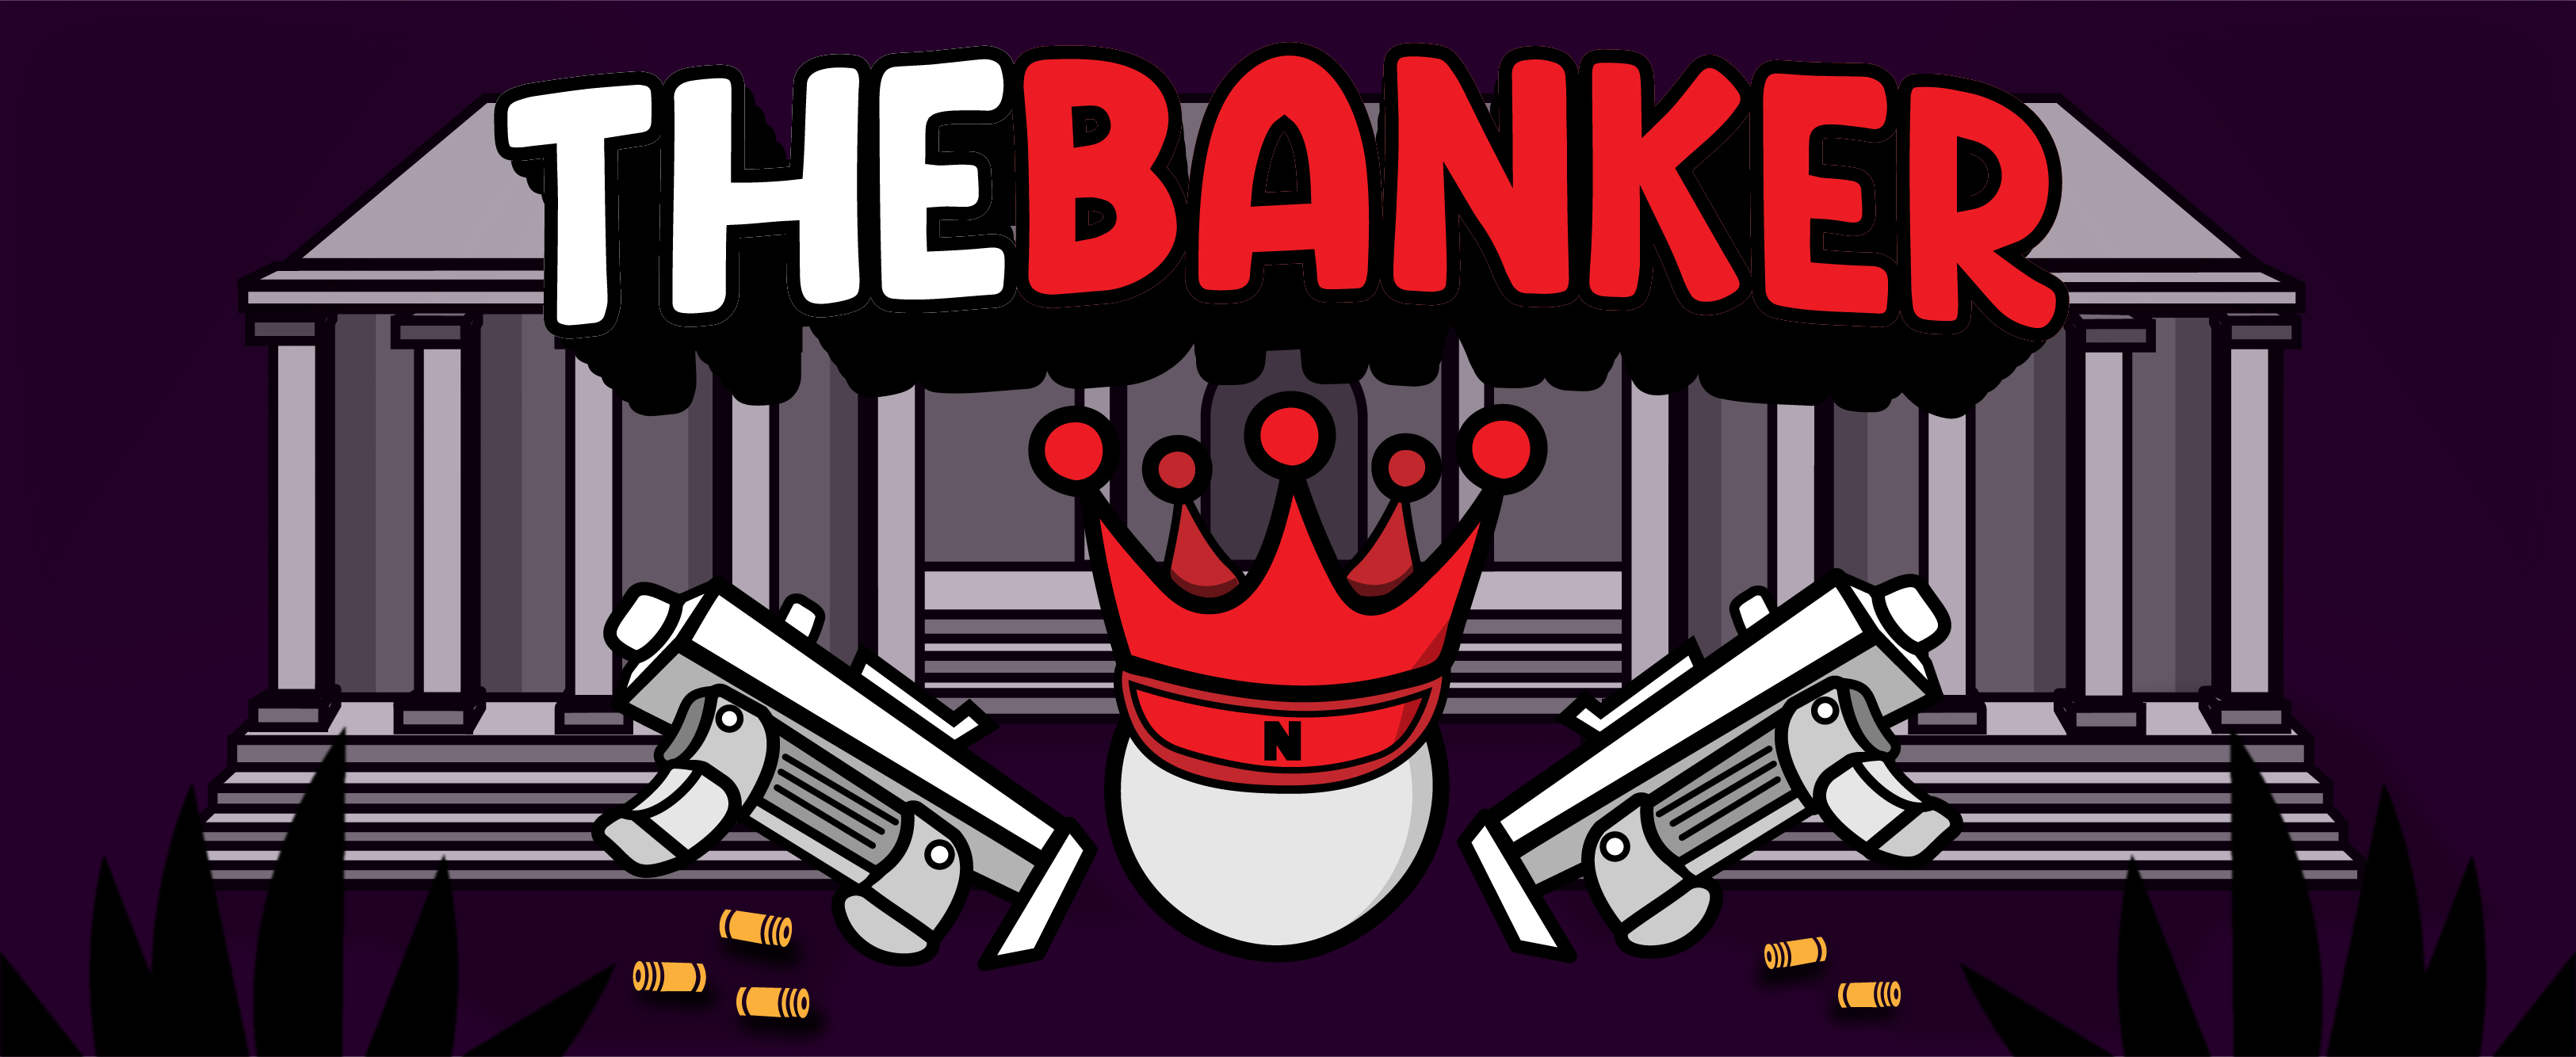 The Banker